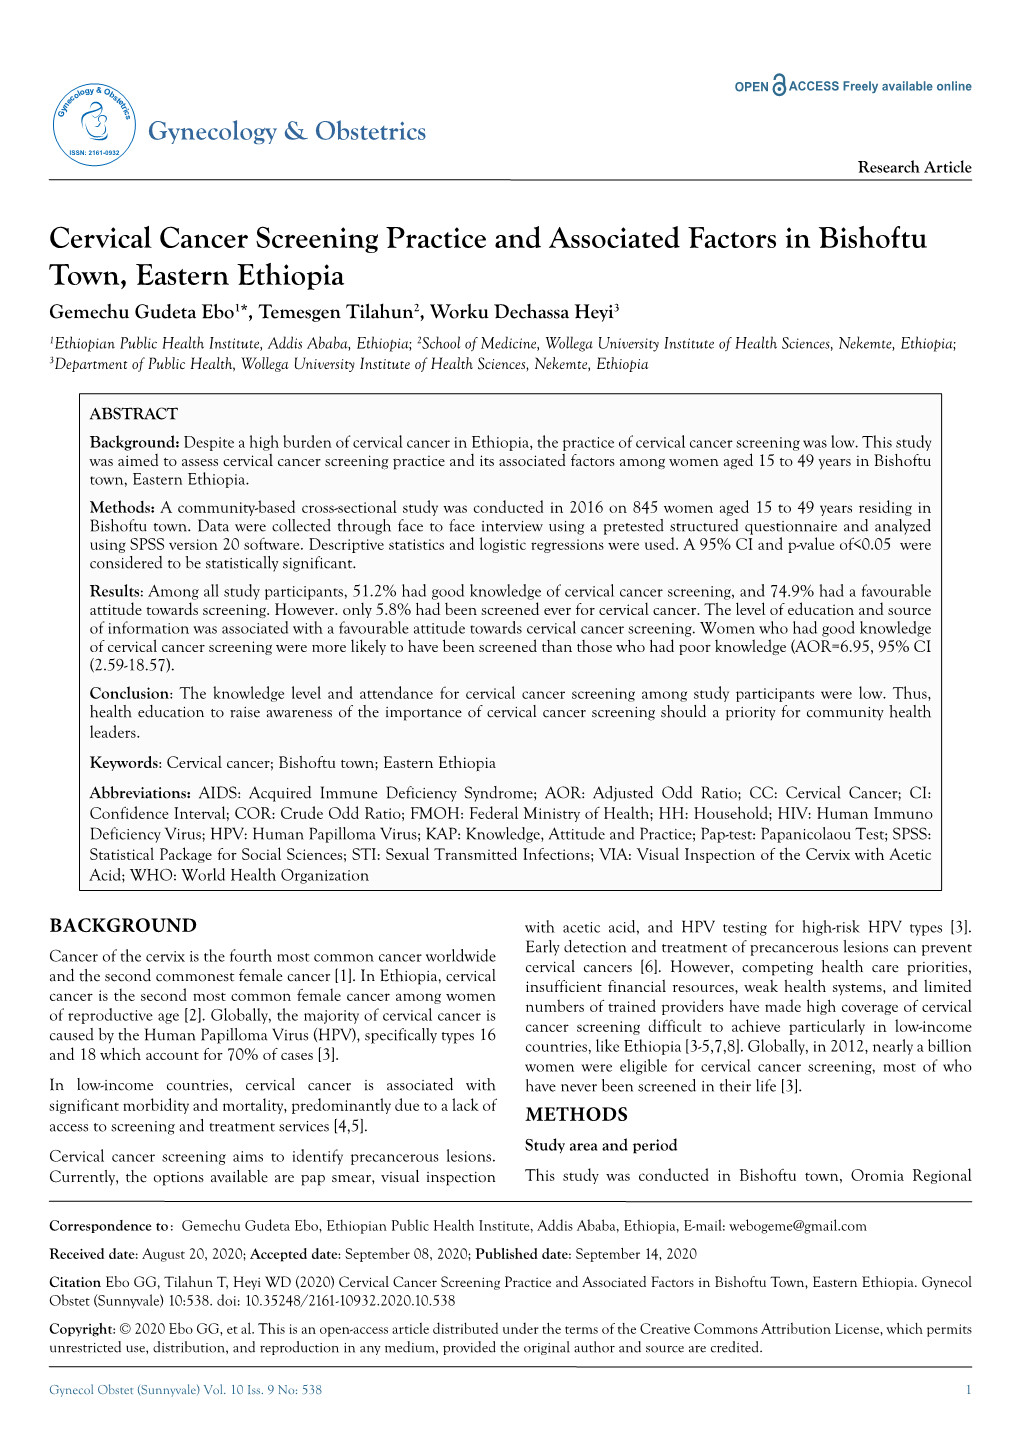 Cervical Cancer Screening Practice and Associated Factors in Bishoftu